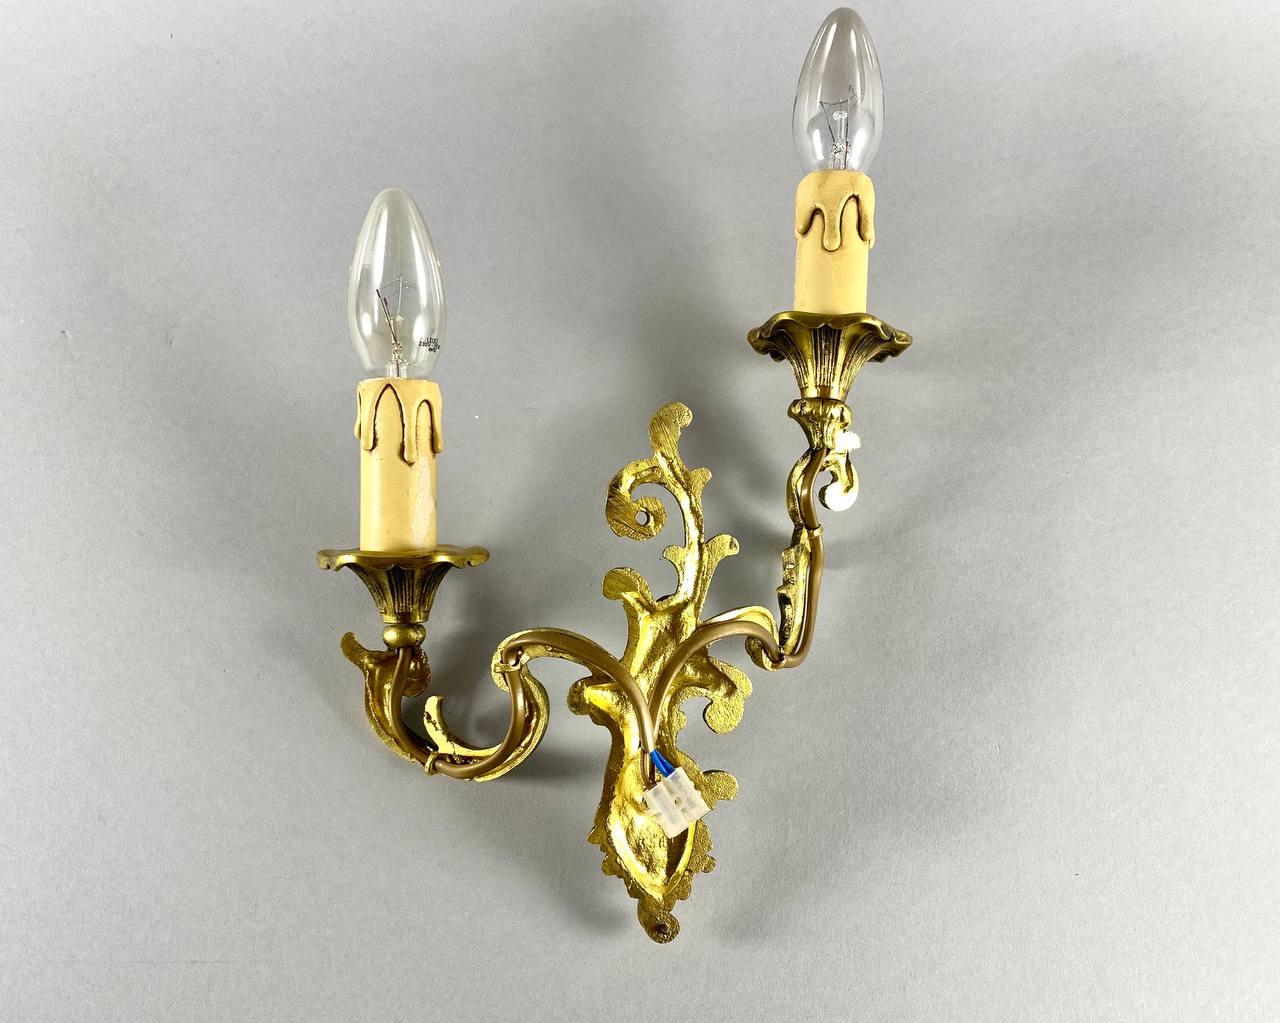 Elegant vintage wall sconce. Made of gilt brass, artistic casting.
Floral motif with classic swirl.

The wall sconce consists of a base and two curved arms emanating from it, skillfully finished with chasing by hand.

The horns of the sconce